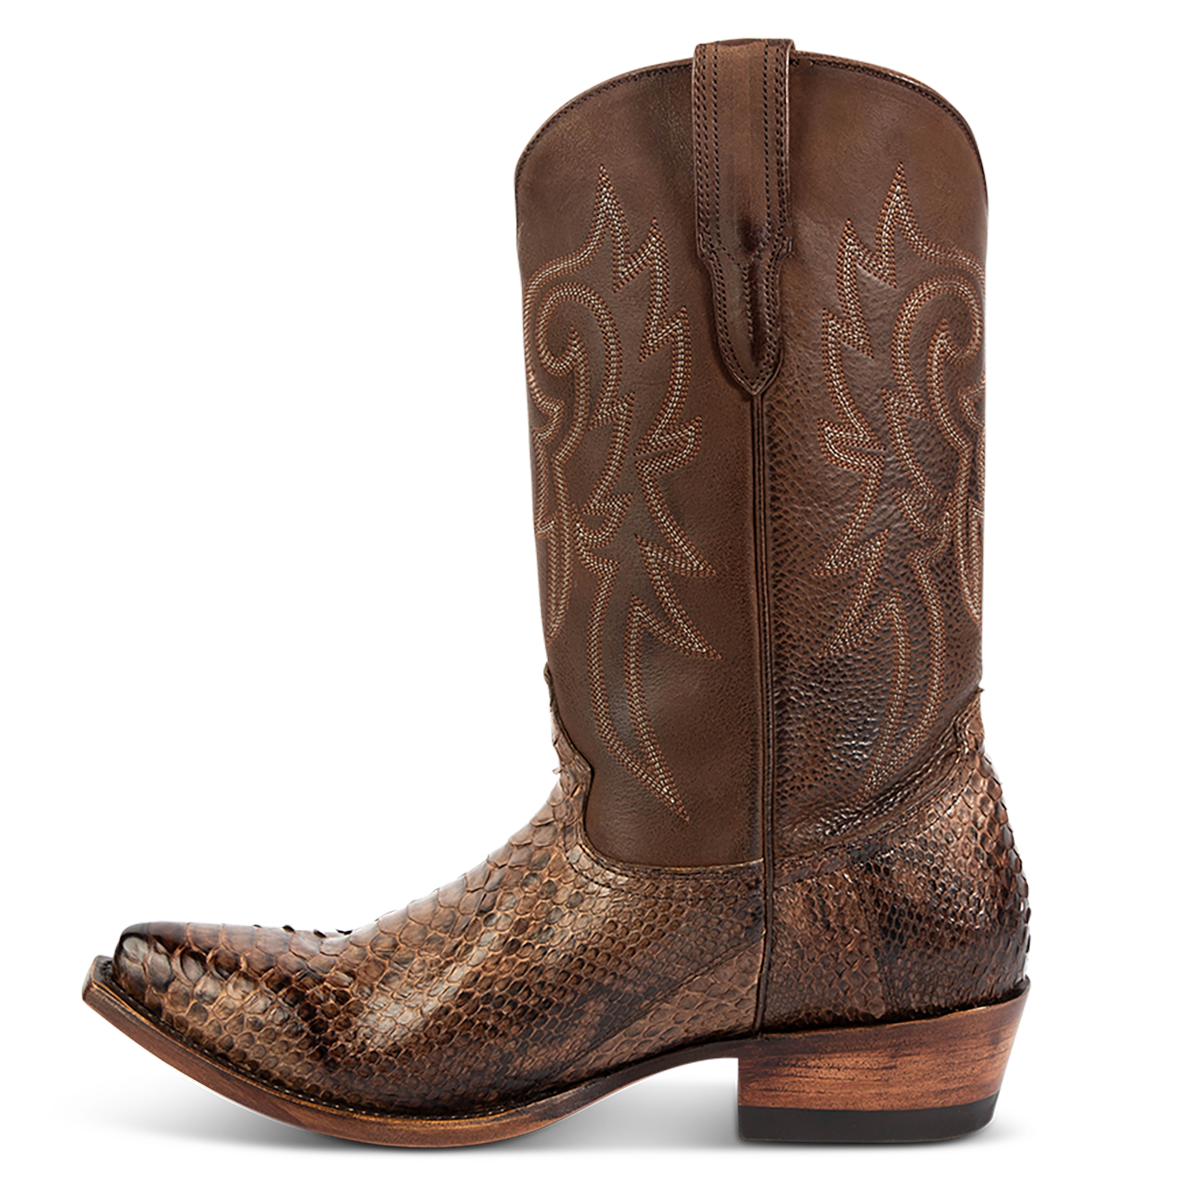 Inside view FREEBIRD men's Marshall brown python leather western cowboy boot with shaft stitch detailing, snip toe construction and leather pull straps